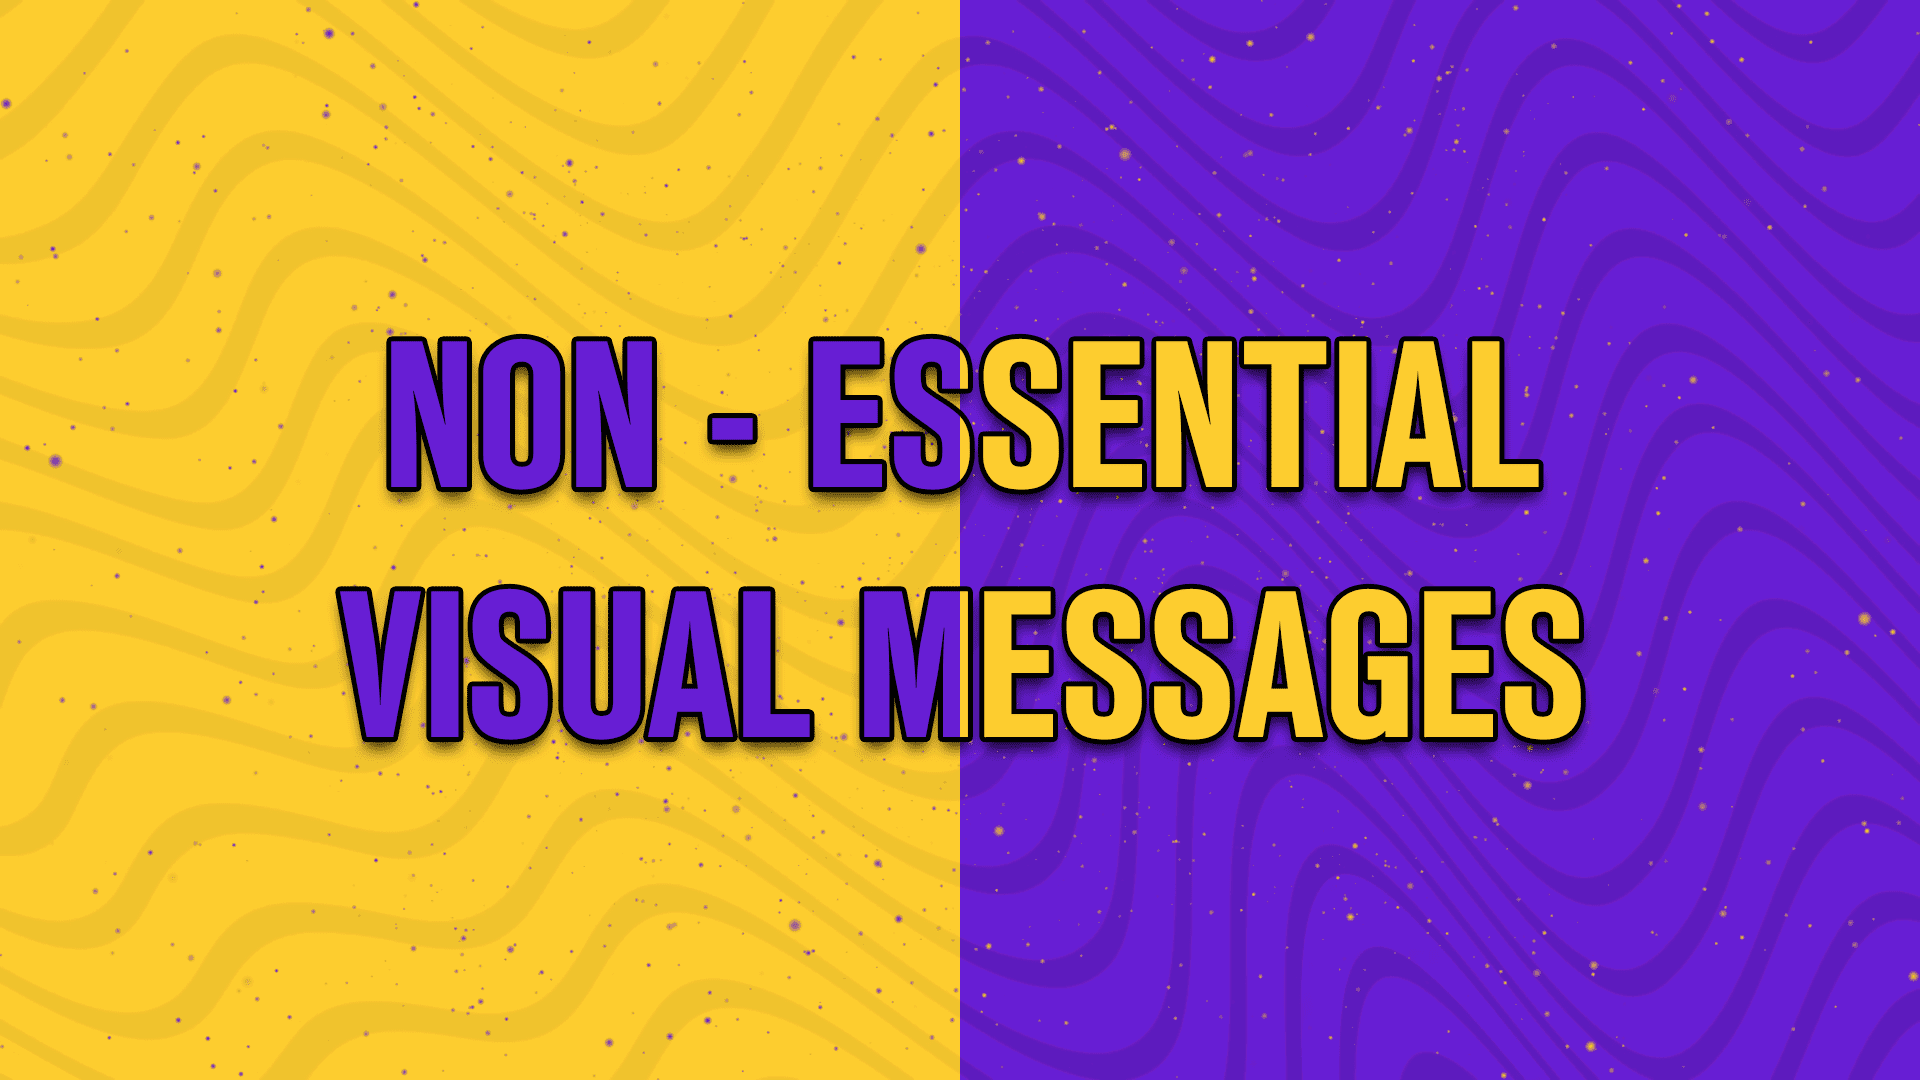 Non essential visual messages - StreamBee